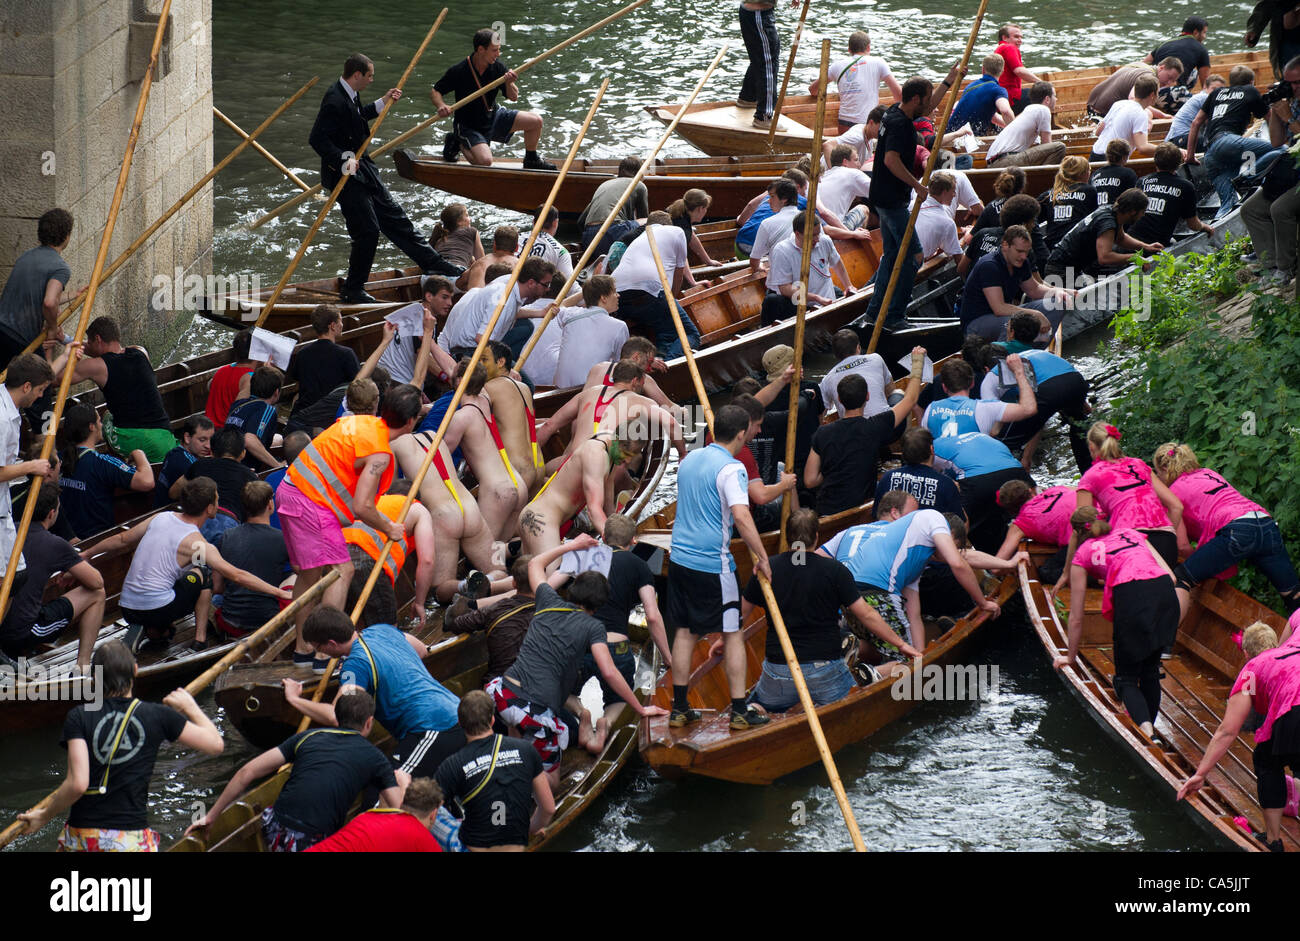 07.06.2012. Tuebingen, Germany.  Several punt boats try to pass a bottleneck during the fancy dress parade of the punt boat race (Stocherkahnrennen) on the river Neckar in tuebingen, Germany, 07 June 2012. Around 50 punt boats competed in this year's traditional punt boat race. Stock Photo